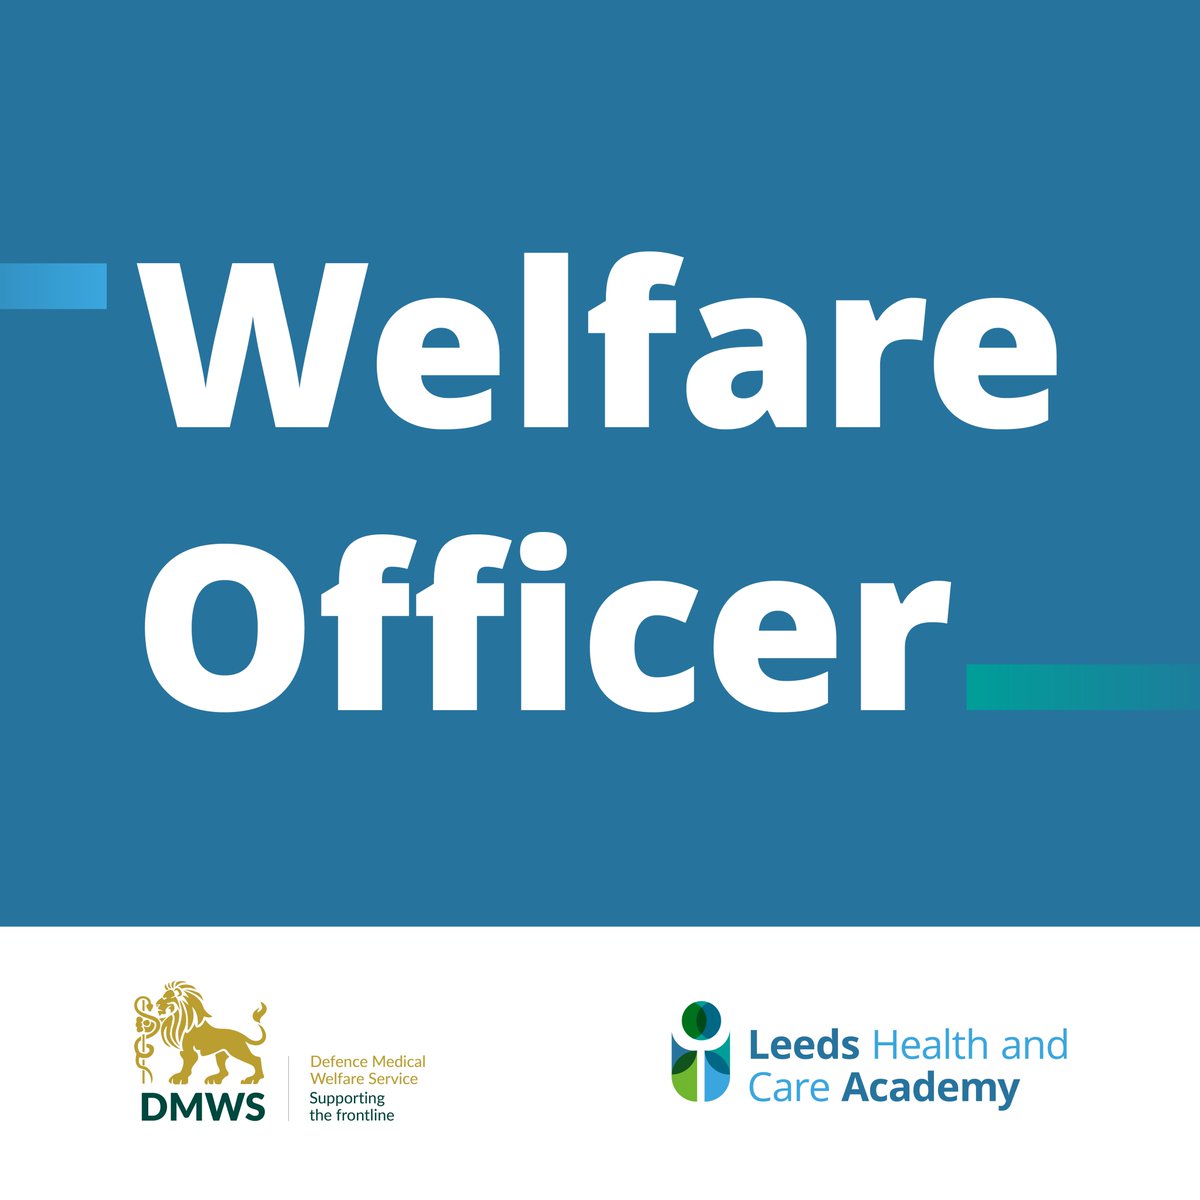 It's not always easy to ask for help when you need it. The Welfare Officer can work with you on a one-to-one basis to provide confidential & practical support, & seek to find solutions to your individual needs. Find out more about this service: leedshealthandcareacademy.org/learning/welfa… @TheDMWS